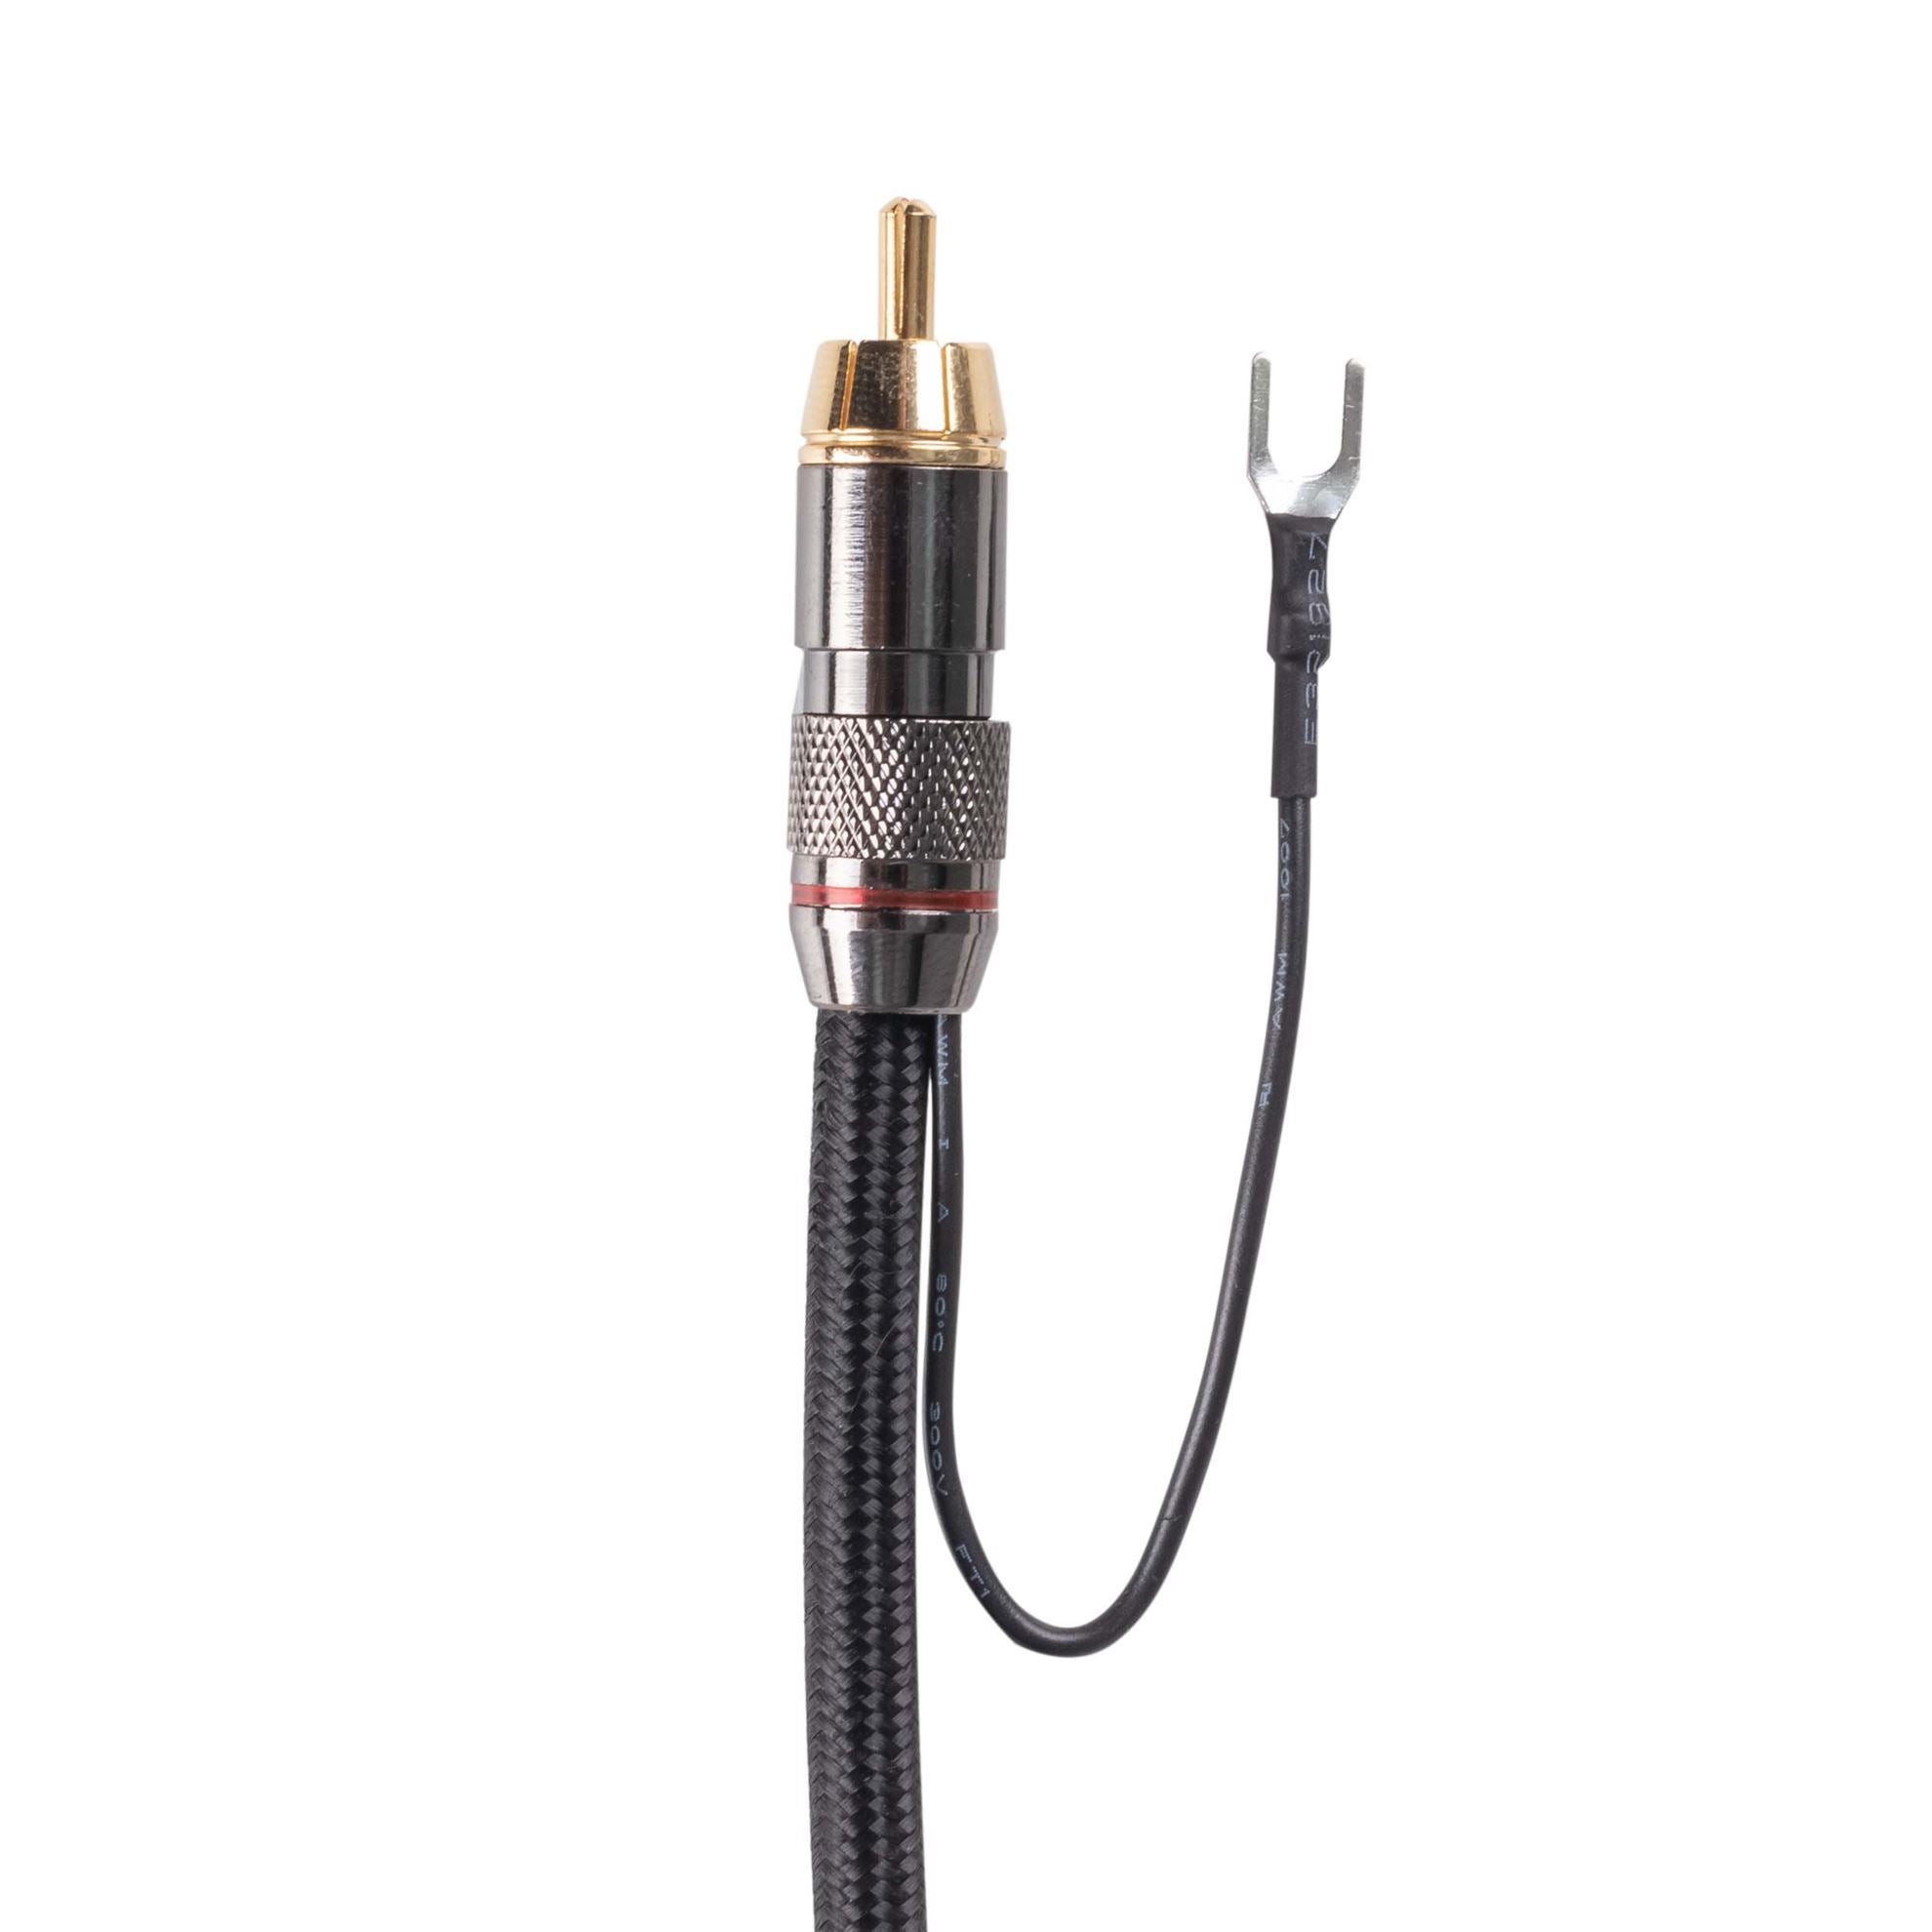 DYNAMIX_0.75m_Coaxial_Subwoofer_Cable_RCA_Male_to_Male_with_Grounding_Spade_Connectors 517